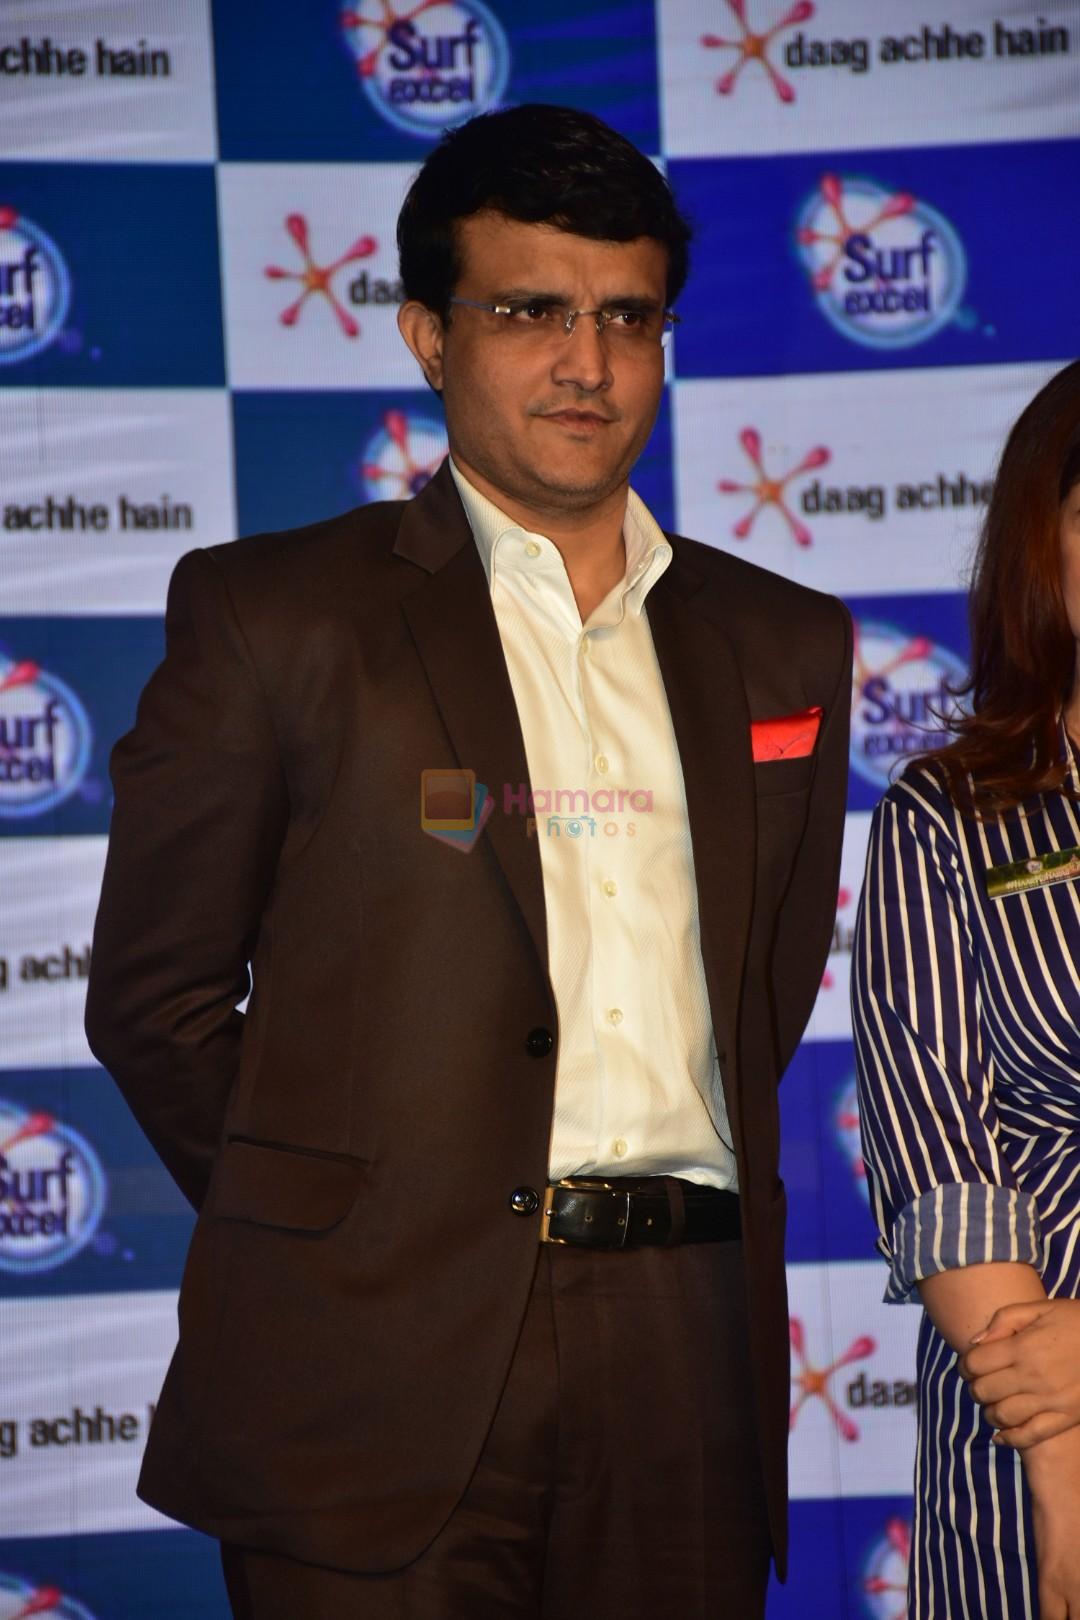 Sourav Ganguly at the Launch Of Surf Excel New Campaign Haarkoharao on 30th Nov 2017